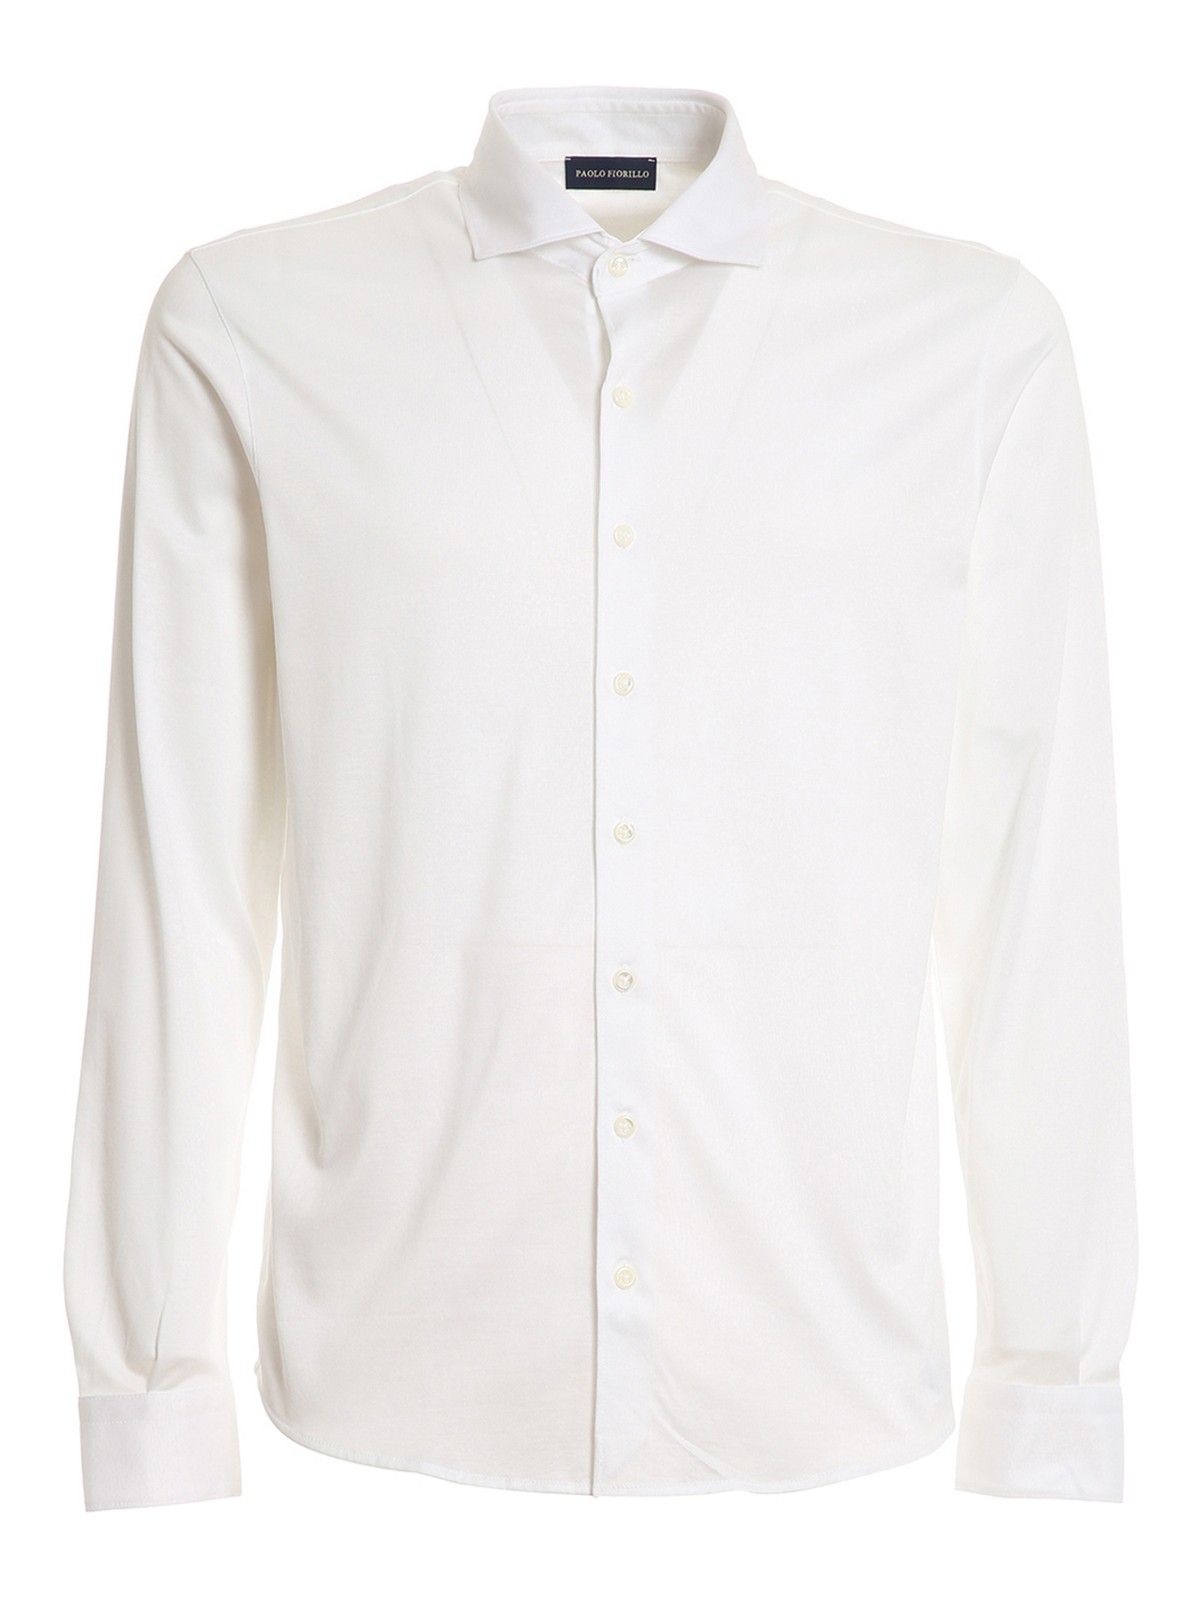 Paolo Fiorillo Jersey Shirt In White